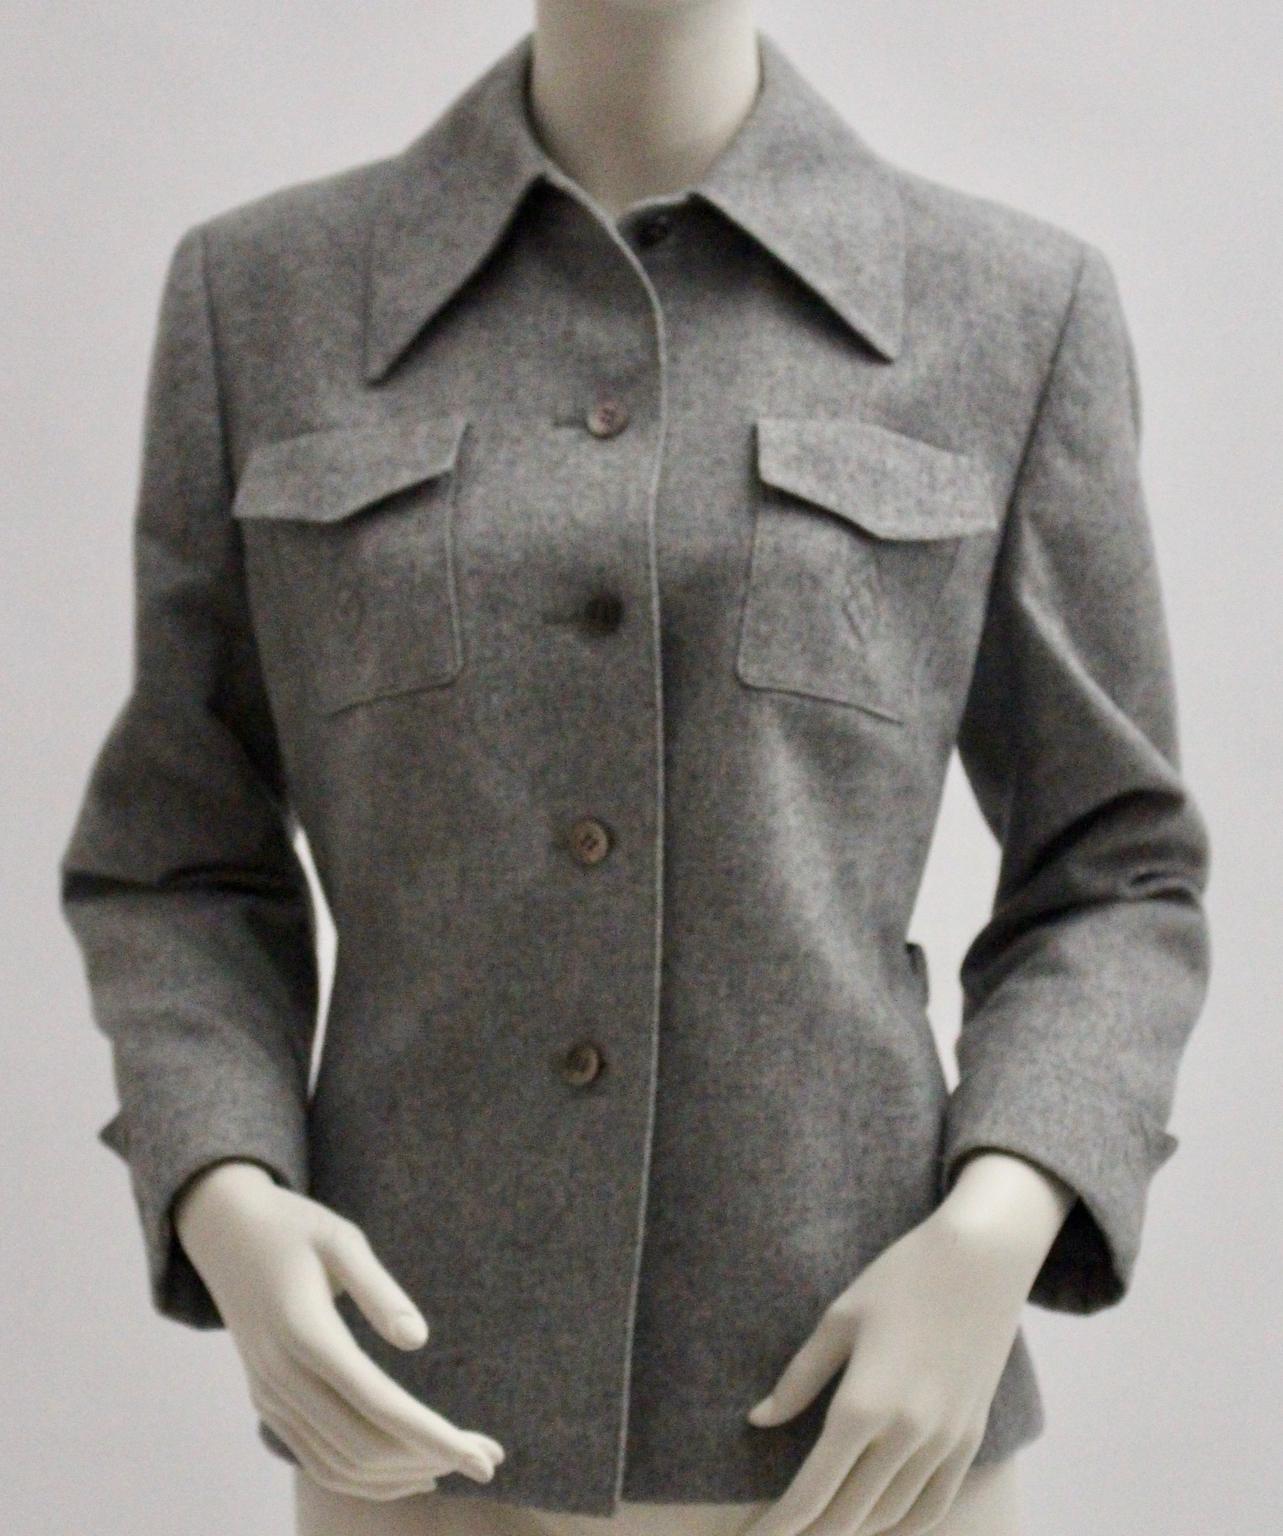 Grey Single-Breasted Wool Vintage Jacket by Herbert Schill 1960s Vienna For Sale 5